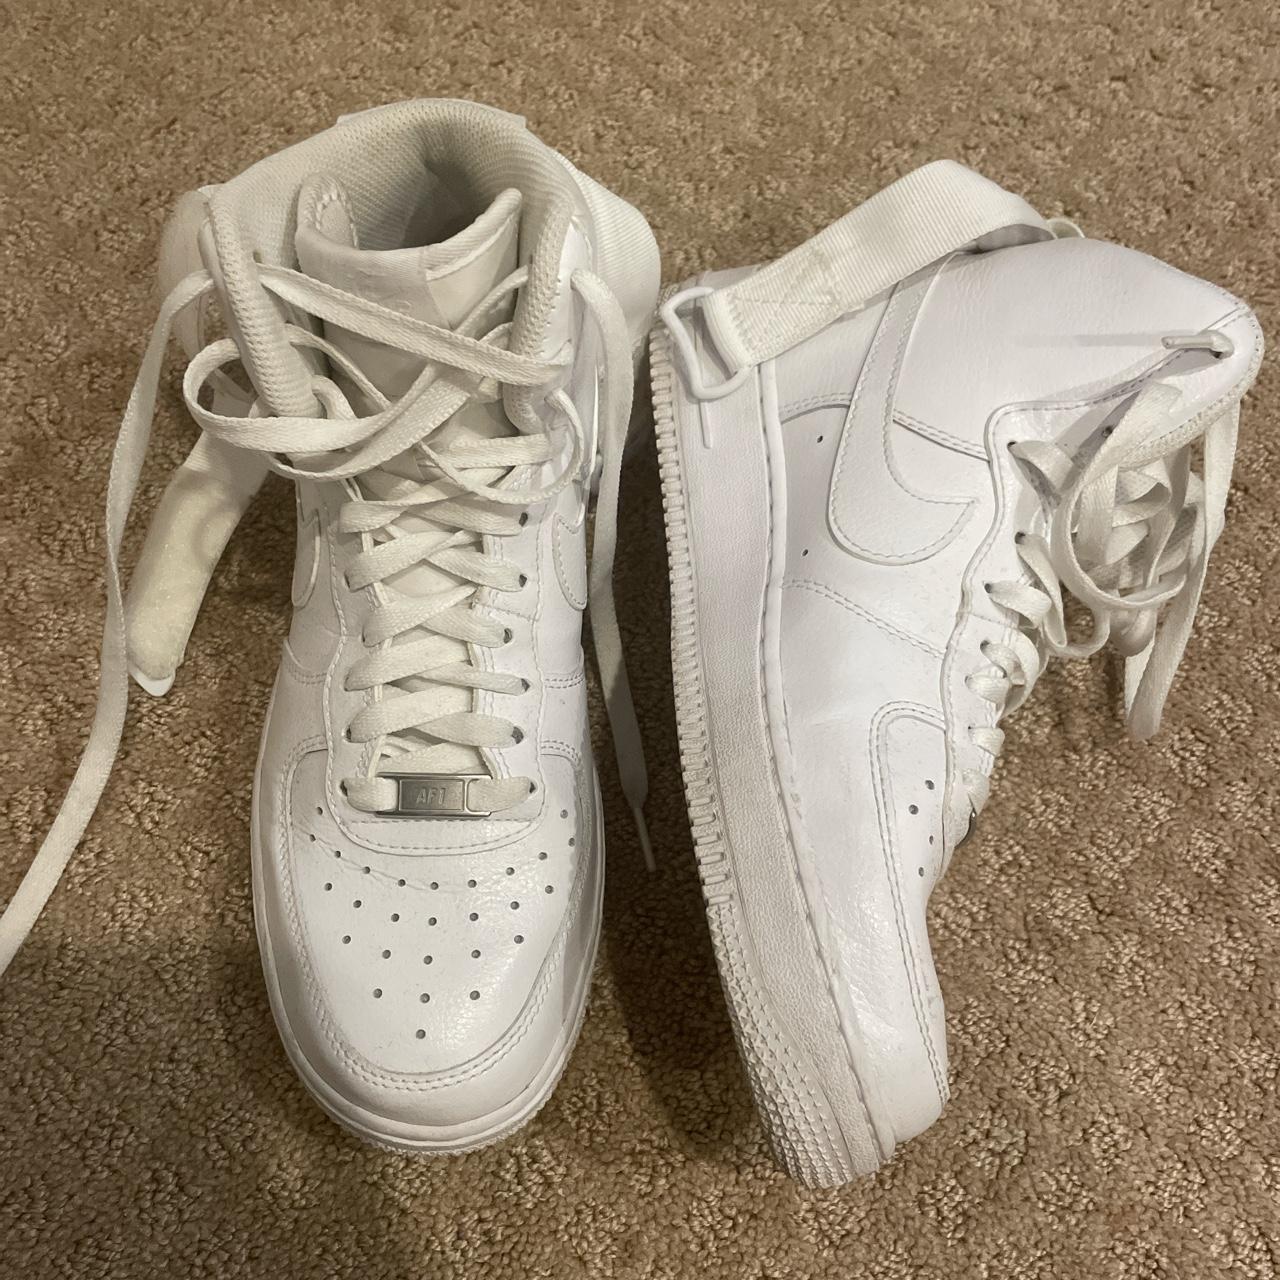 High top white air forces. Only worn a few times but... - Depop